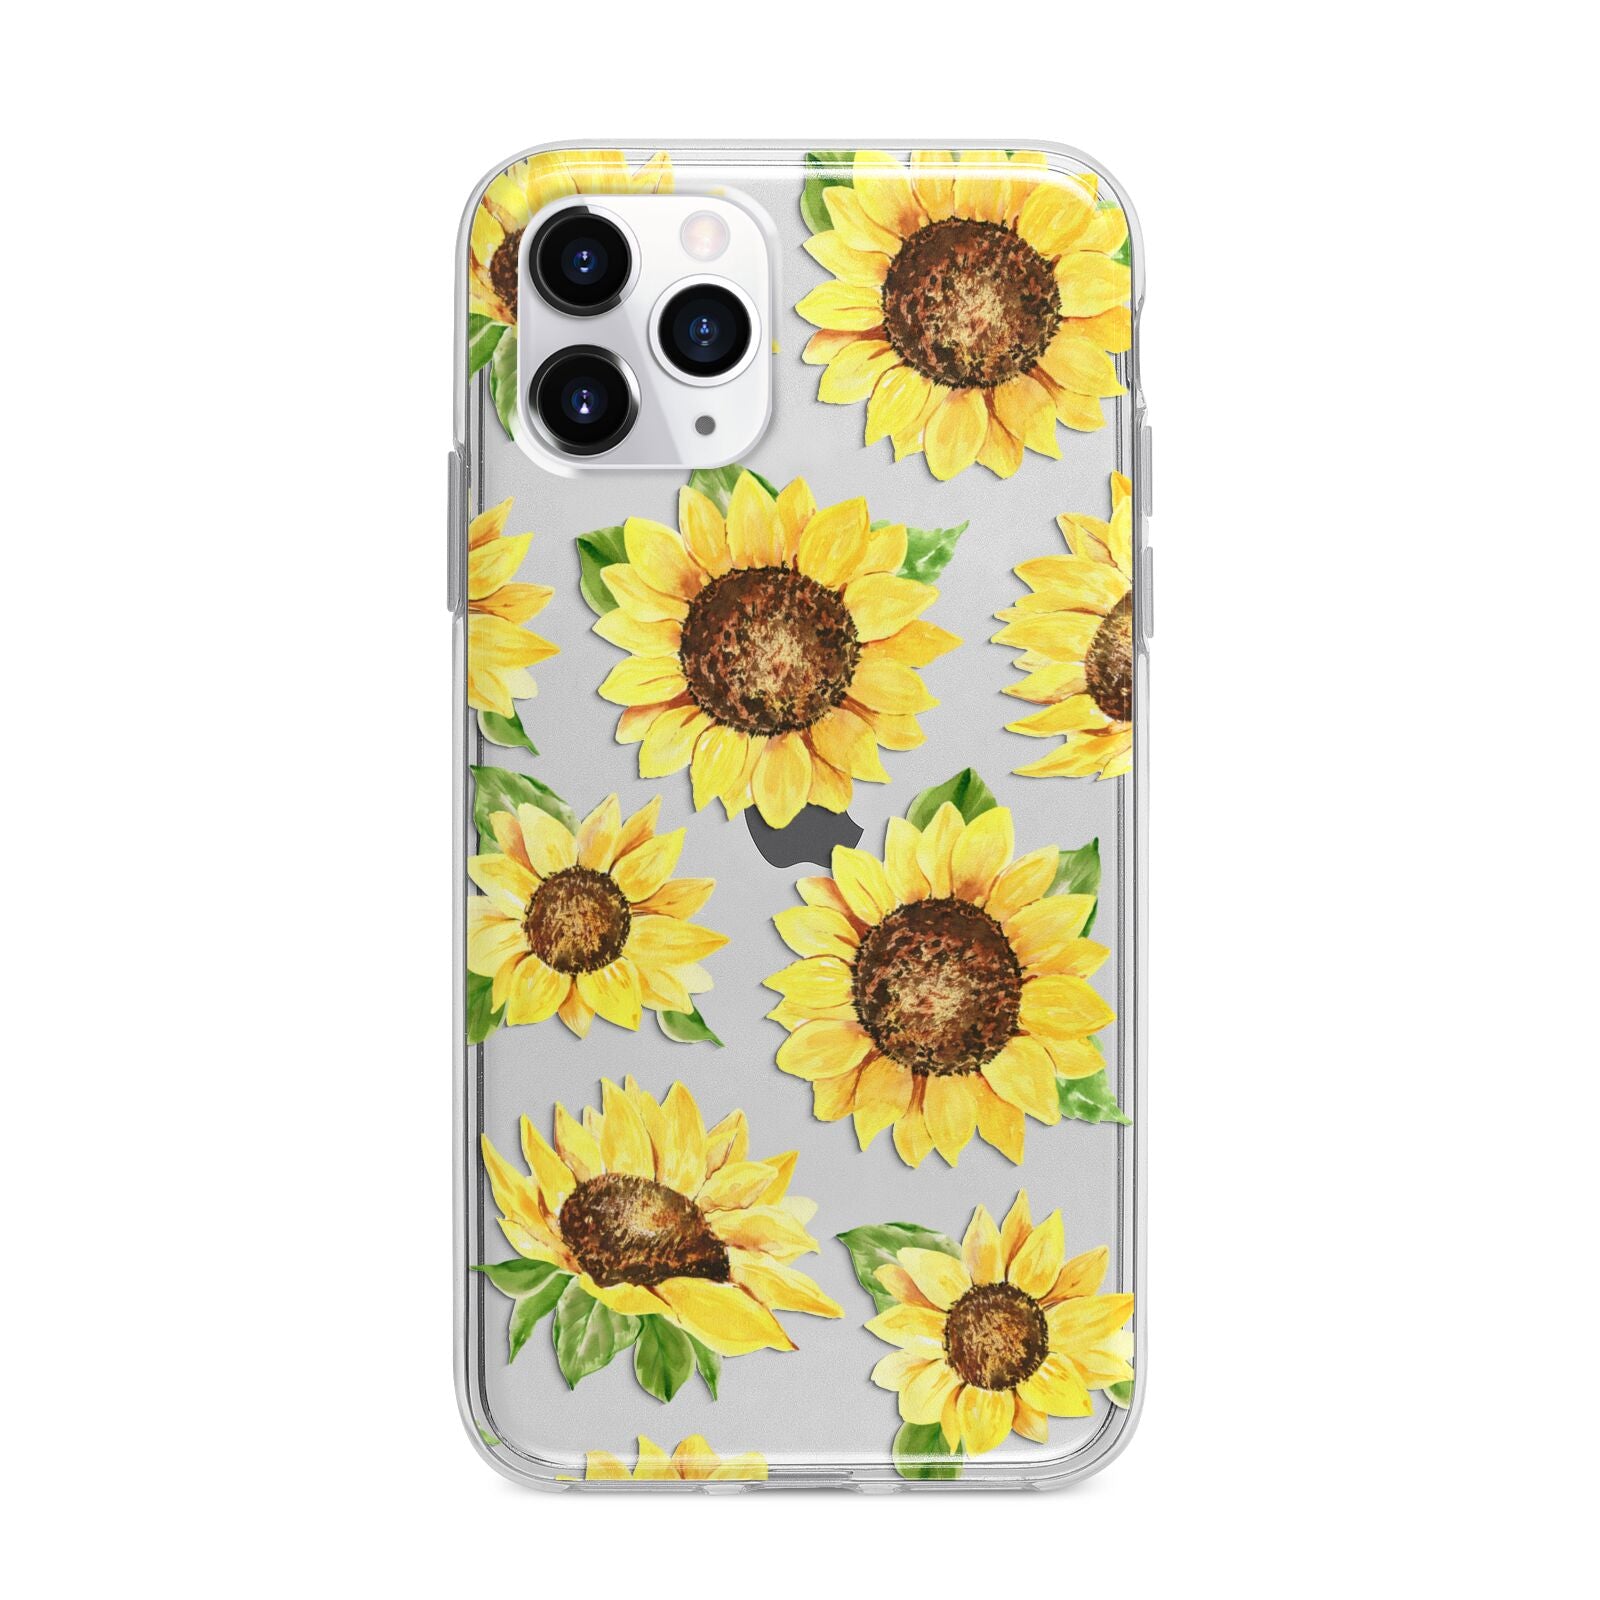 Sunflowers Apple iPhone 11 Pro Max in Silver with Bumper Case